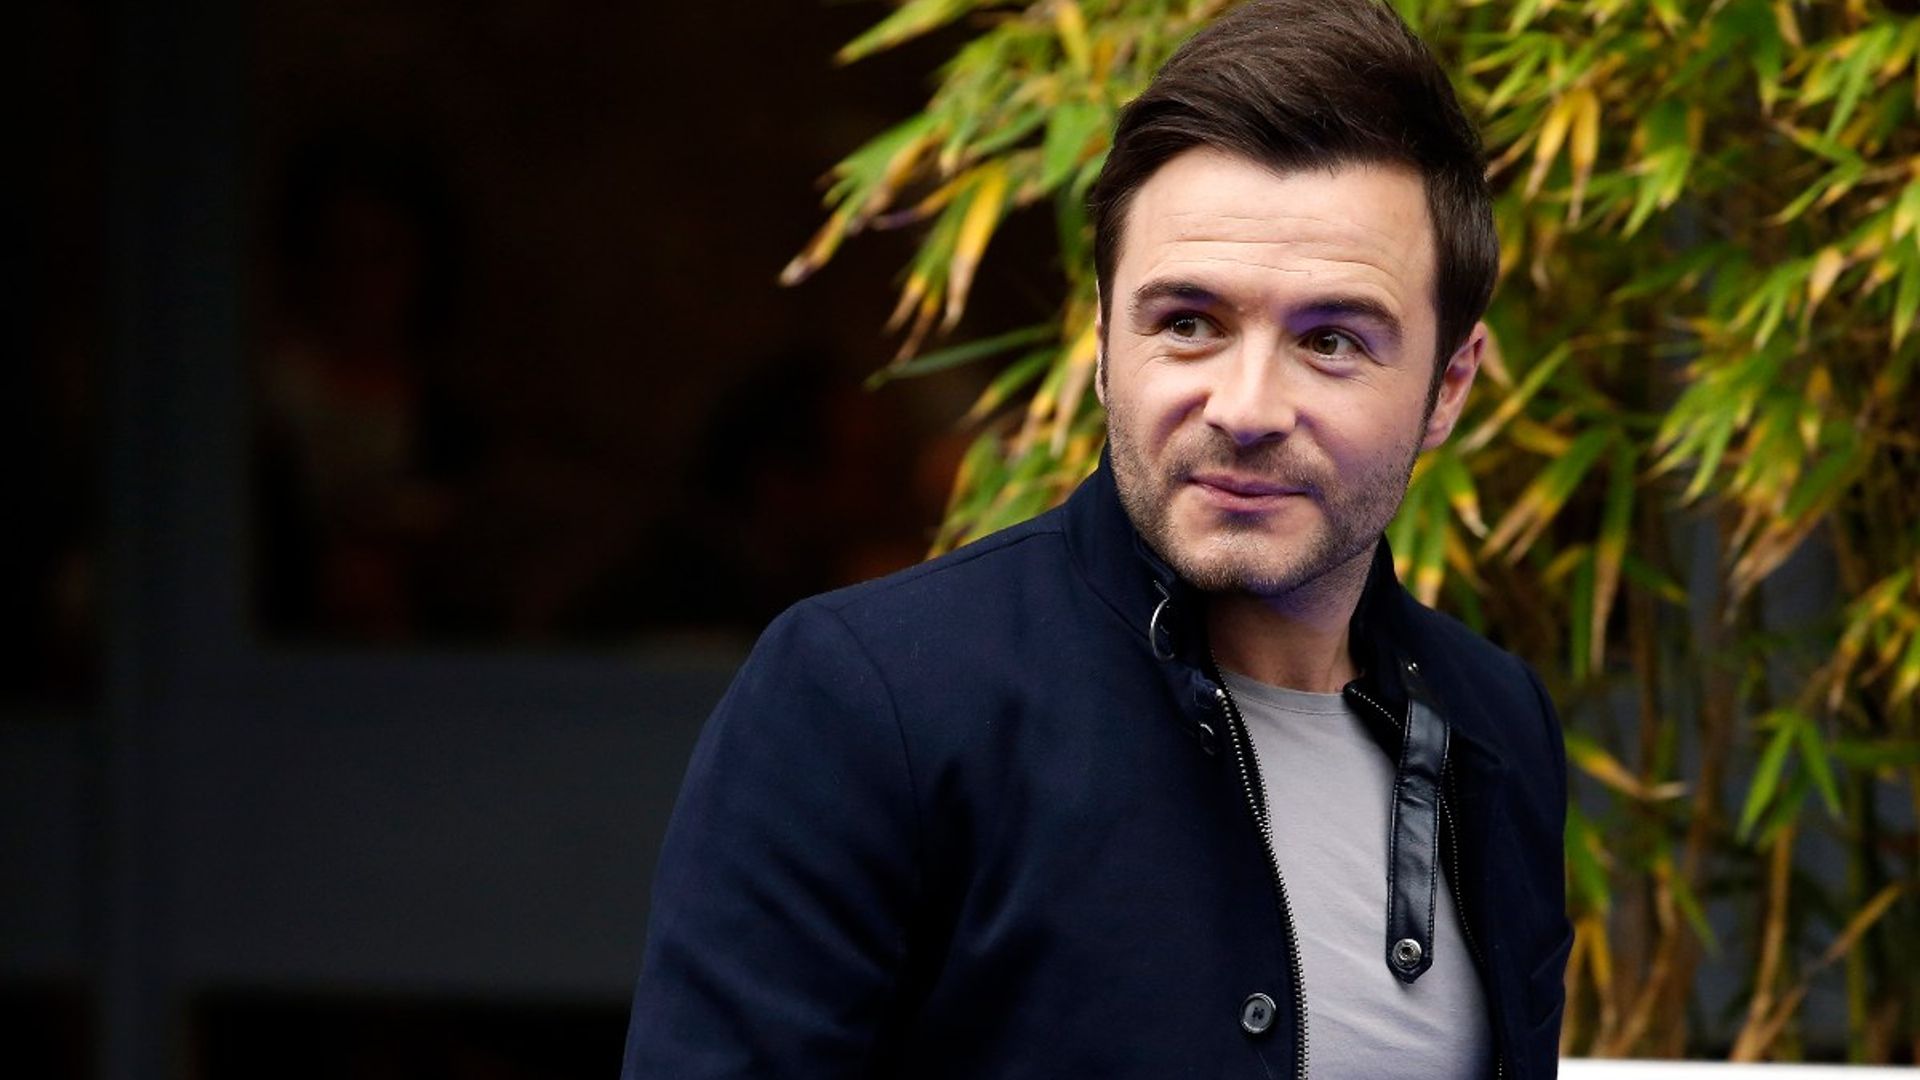 Westlife's Shane Filan reveals heartbreaking loss of both parents in emotional Loose Women interview